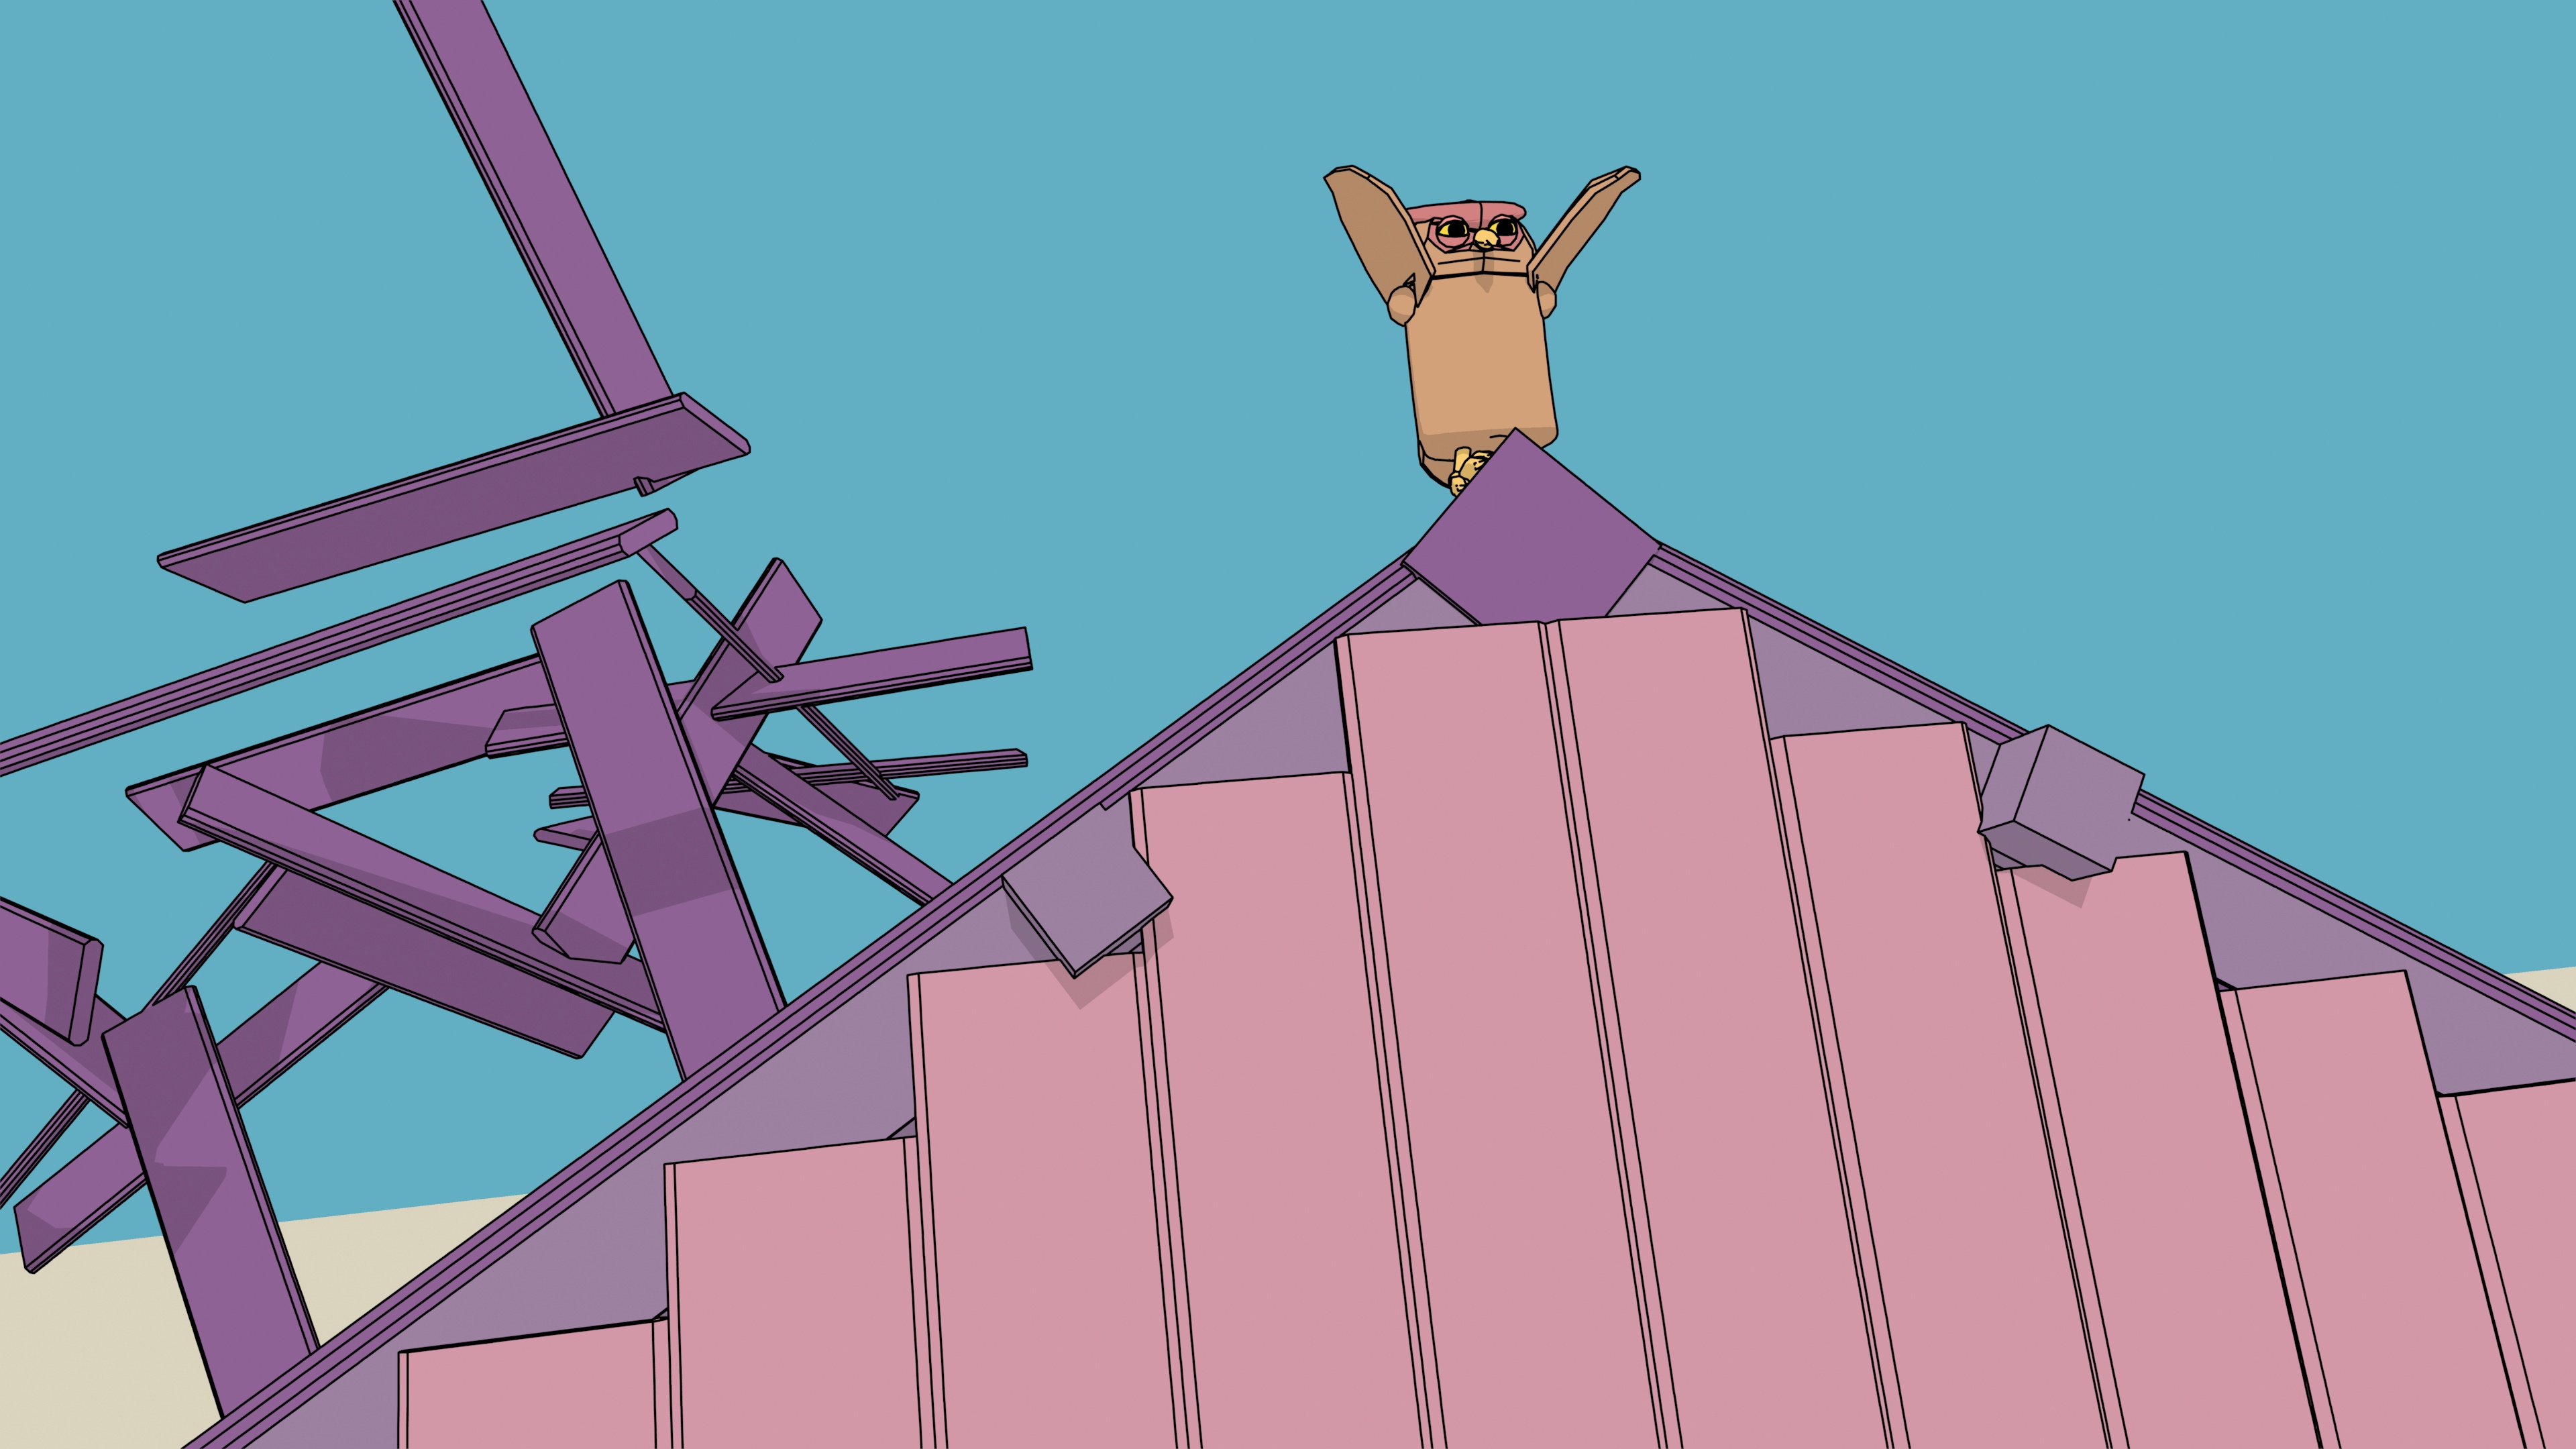 A horned owl takes flight from a barn roof as an explosion sends the roof planks flying.